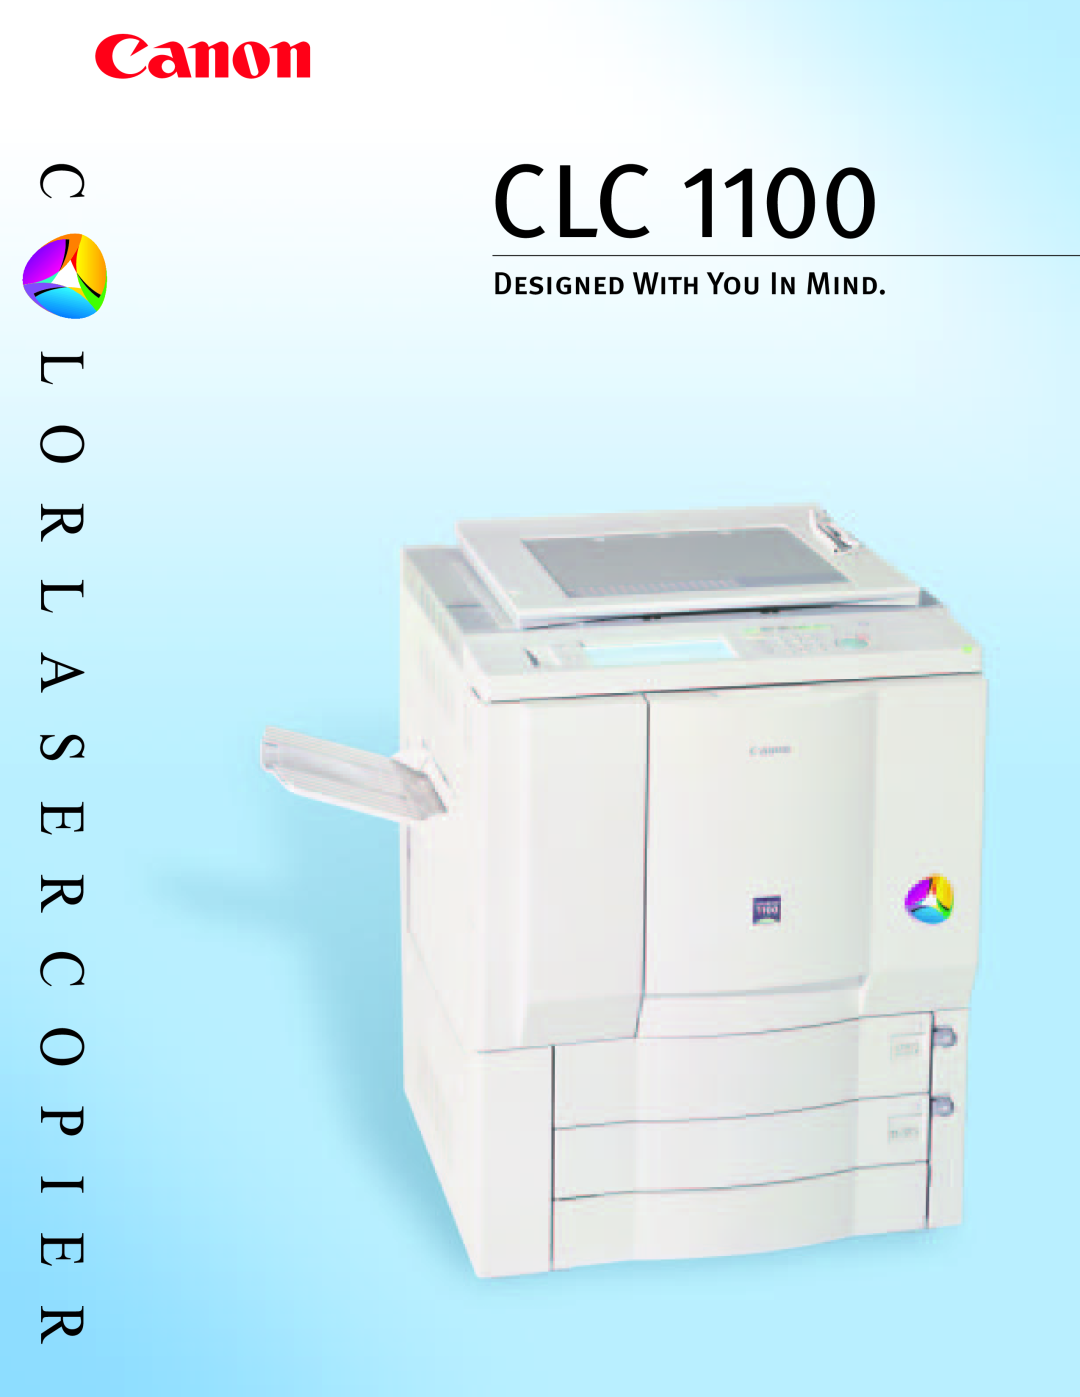 Canon CLC1100 manual Designed With You In Mind 